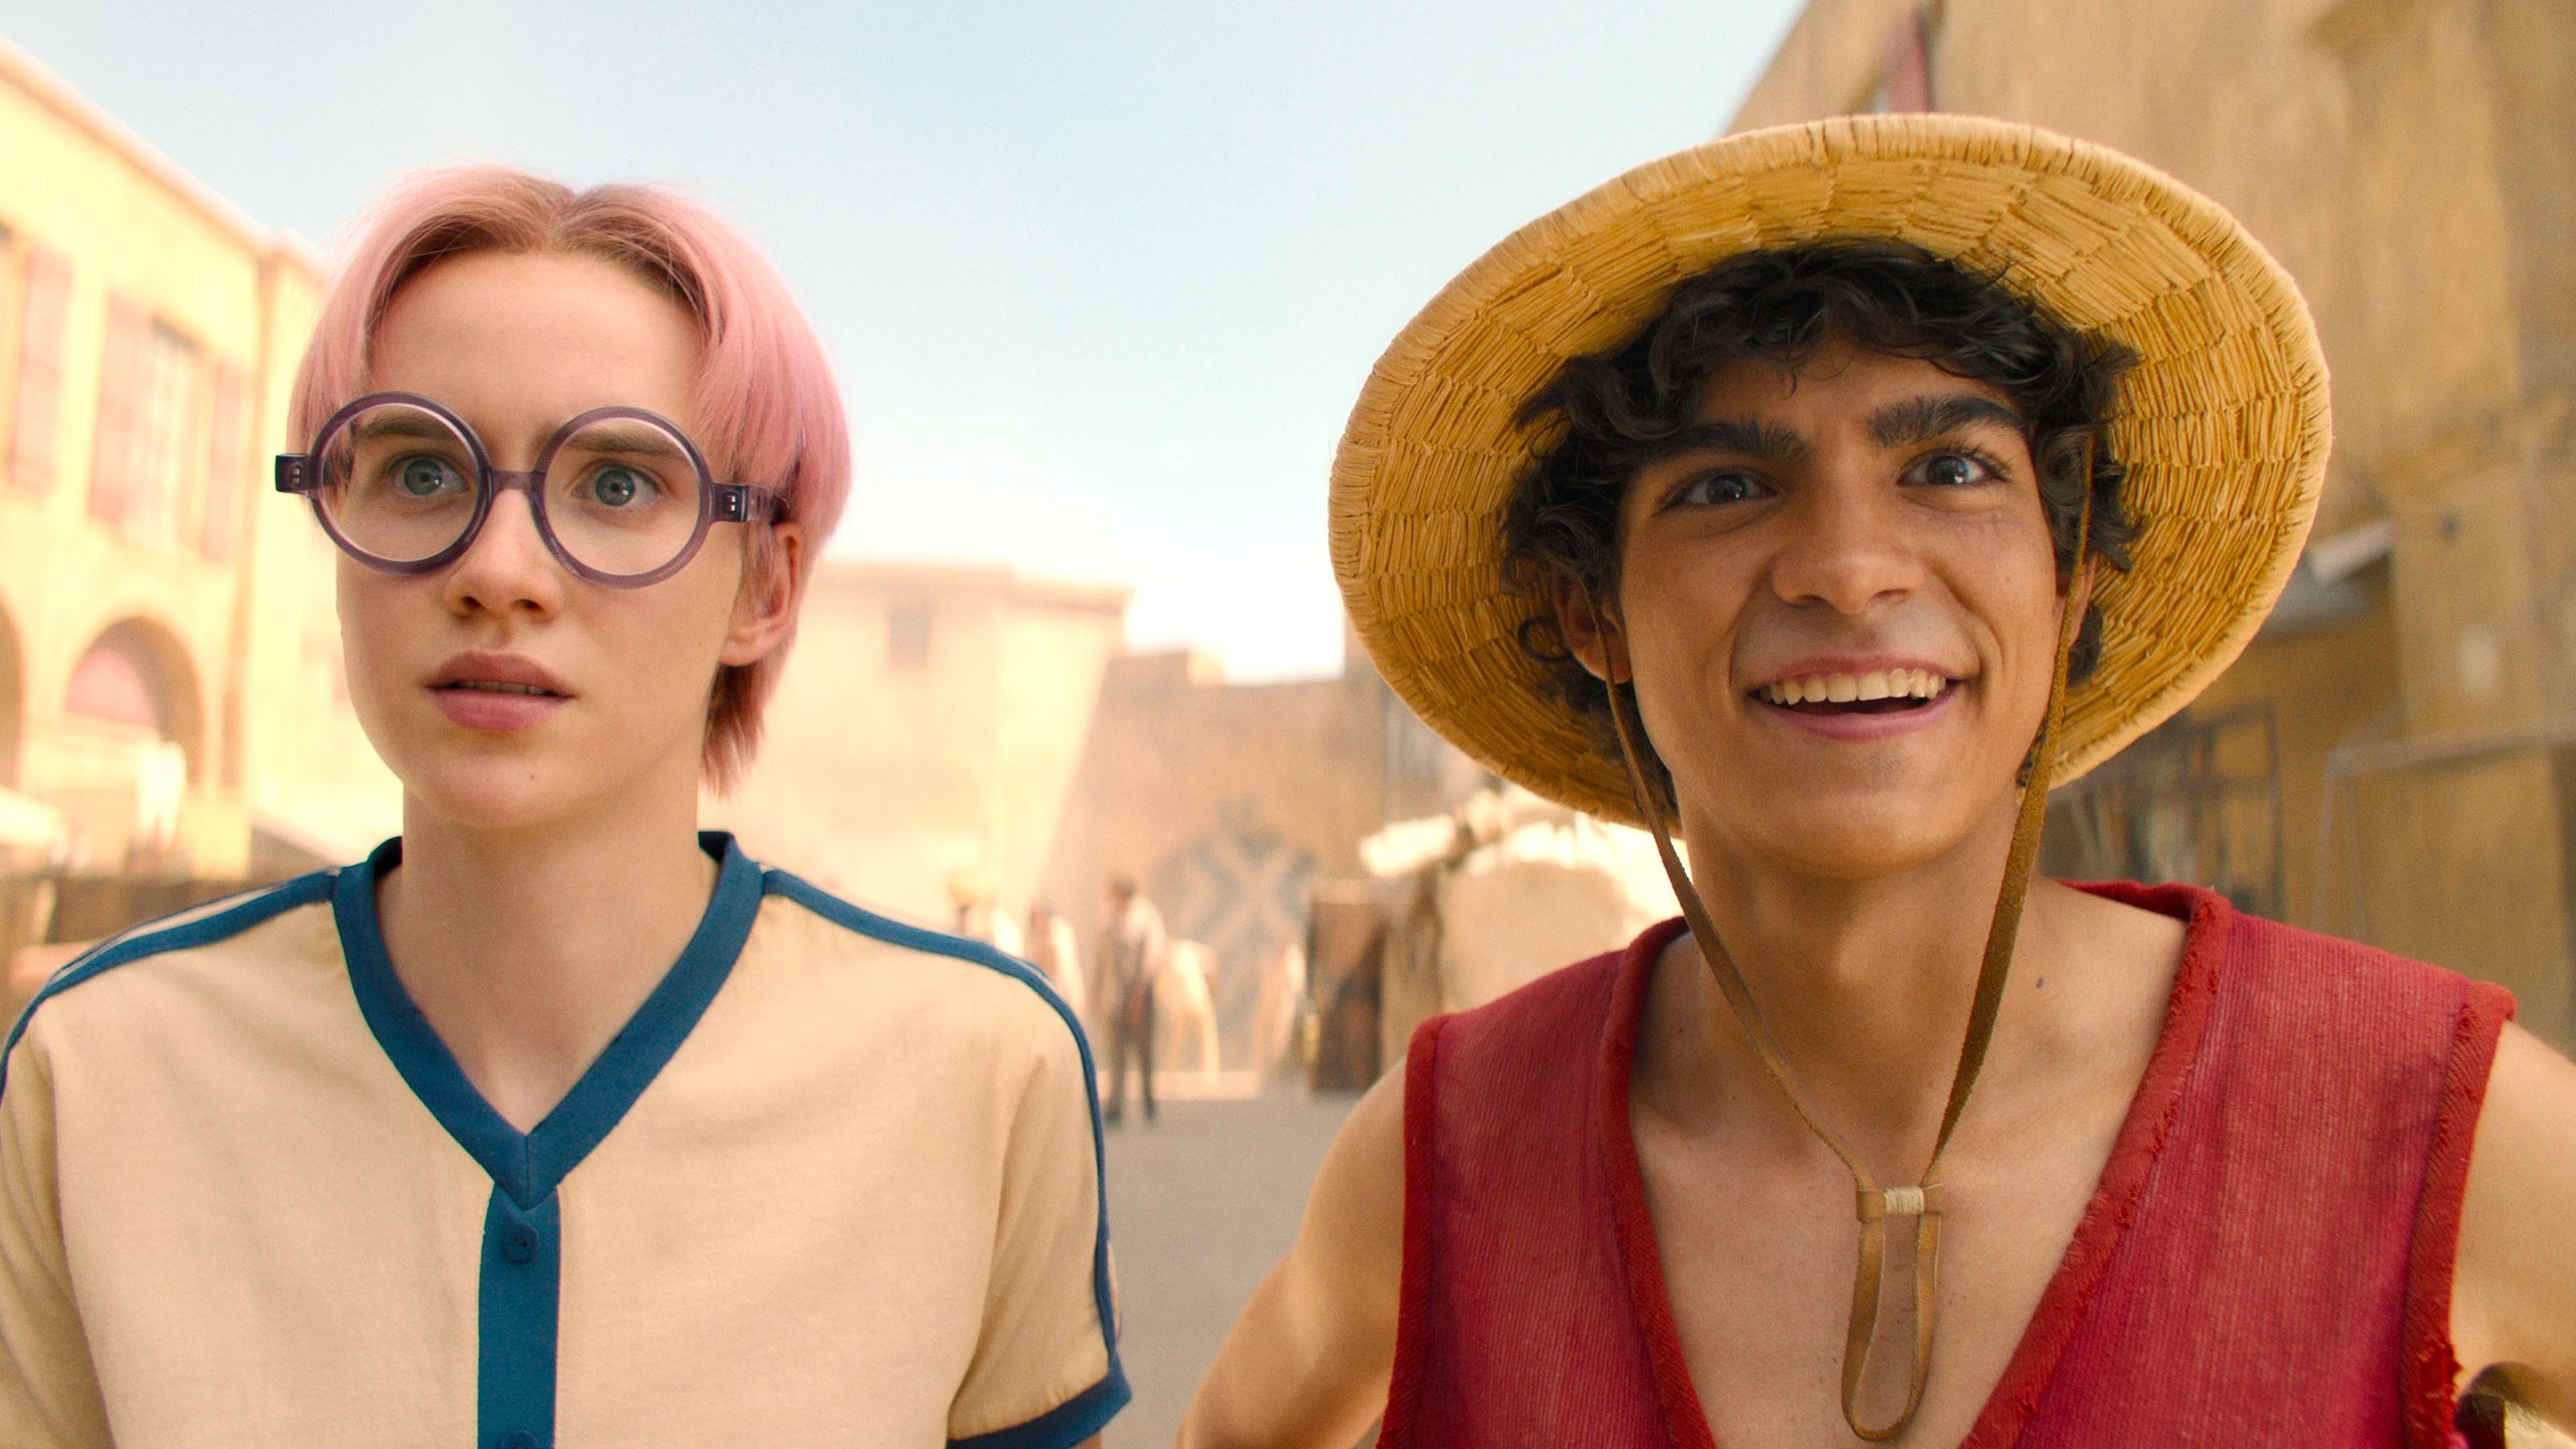 10 One Piece Easter Eggs In The Netflix Live-Action Adaptation